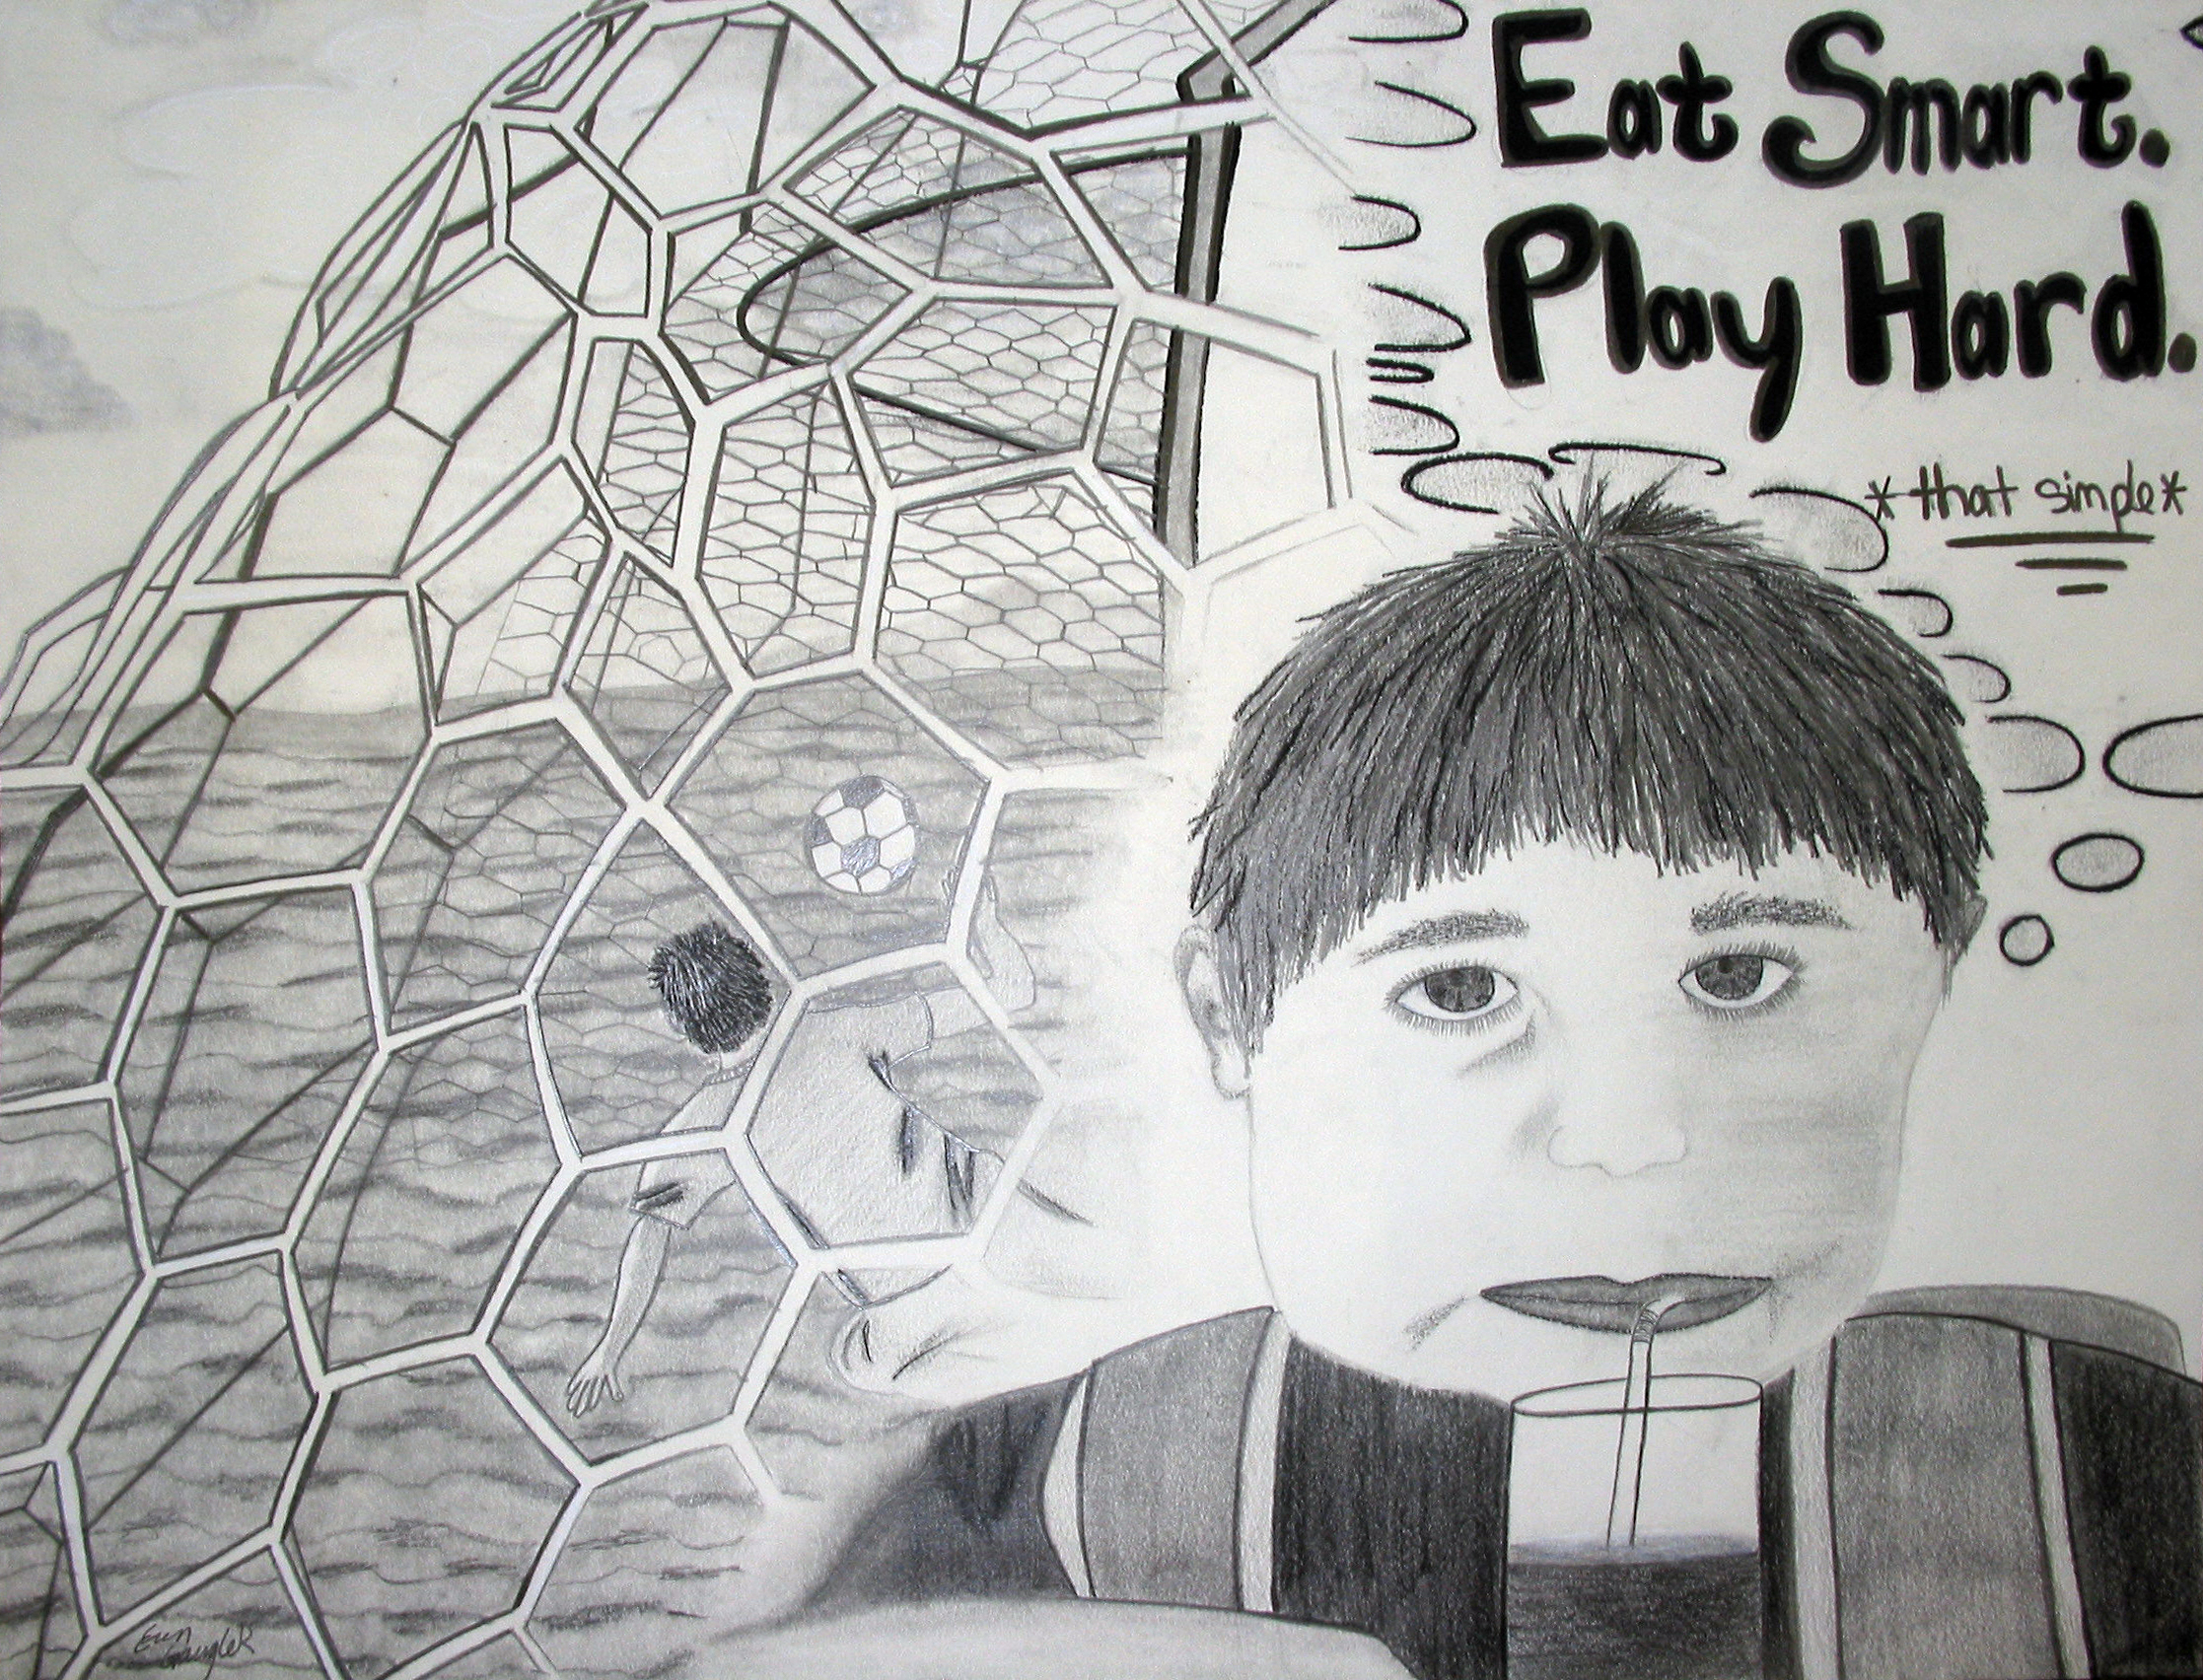 Erin Gaugler, Grant County, earned third place in the teen division of the ""Eat Smart. Play Hard."" poster contest with this entry.